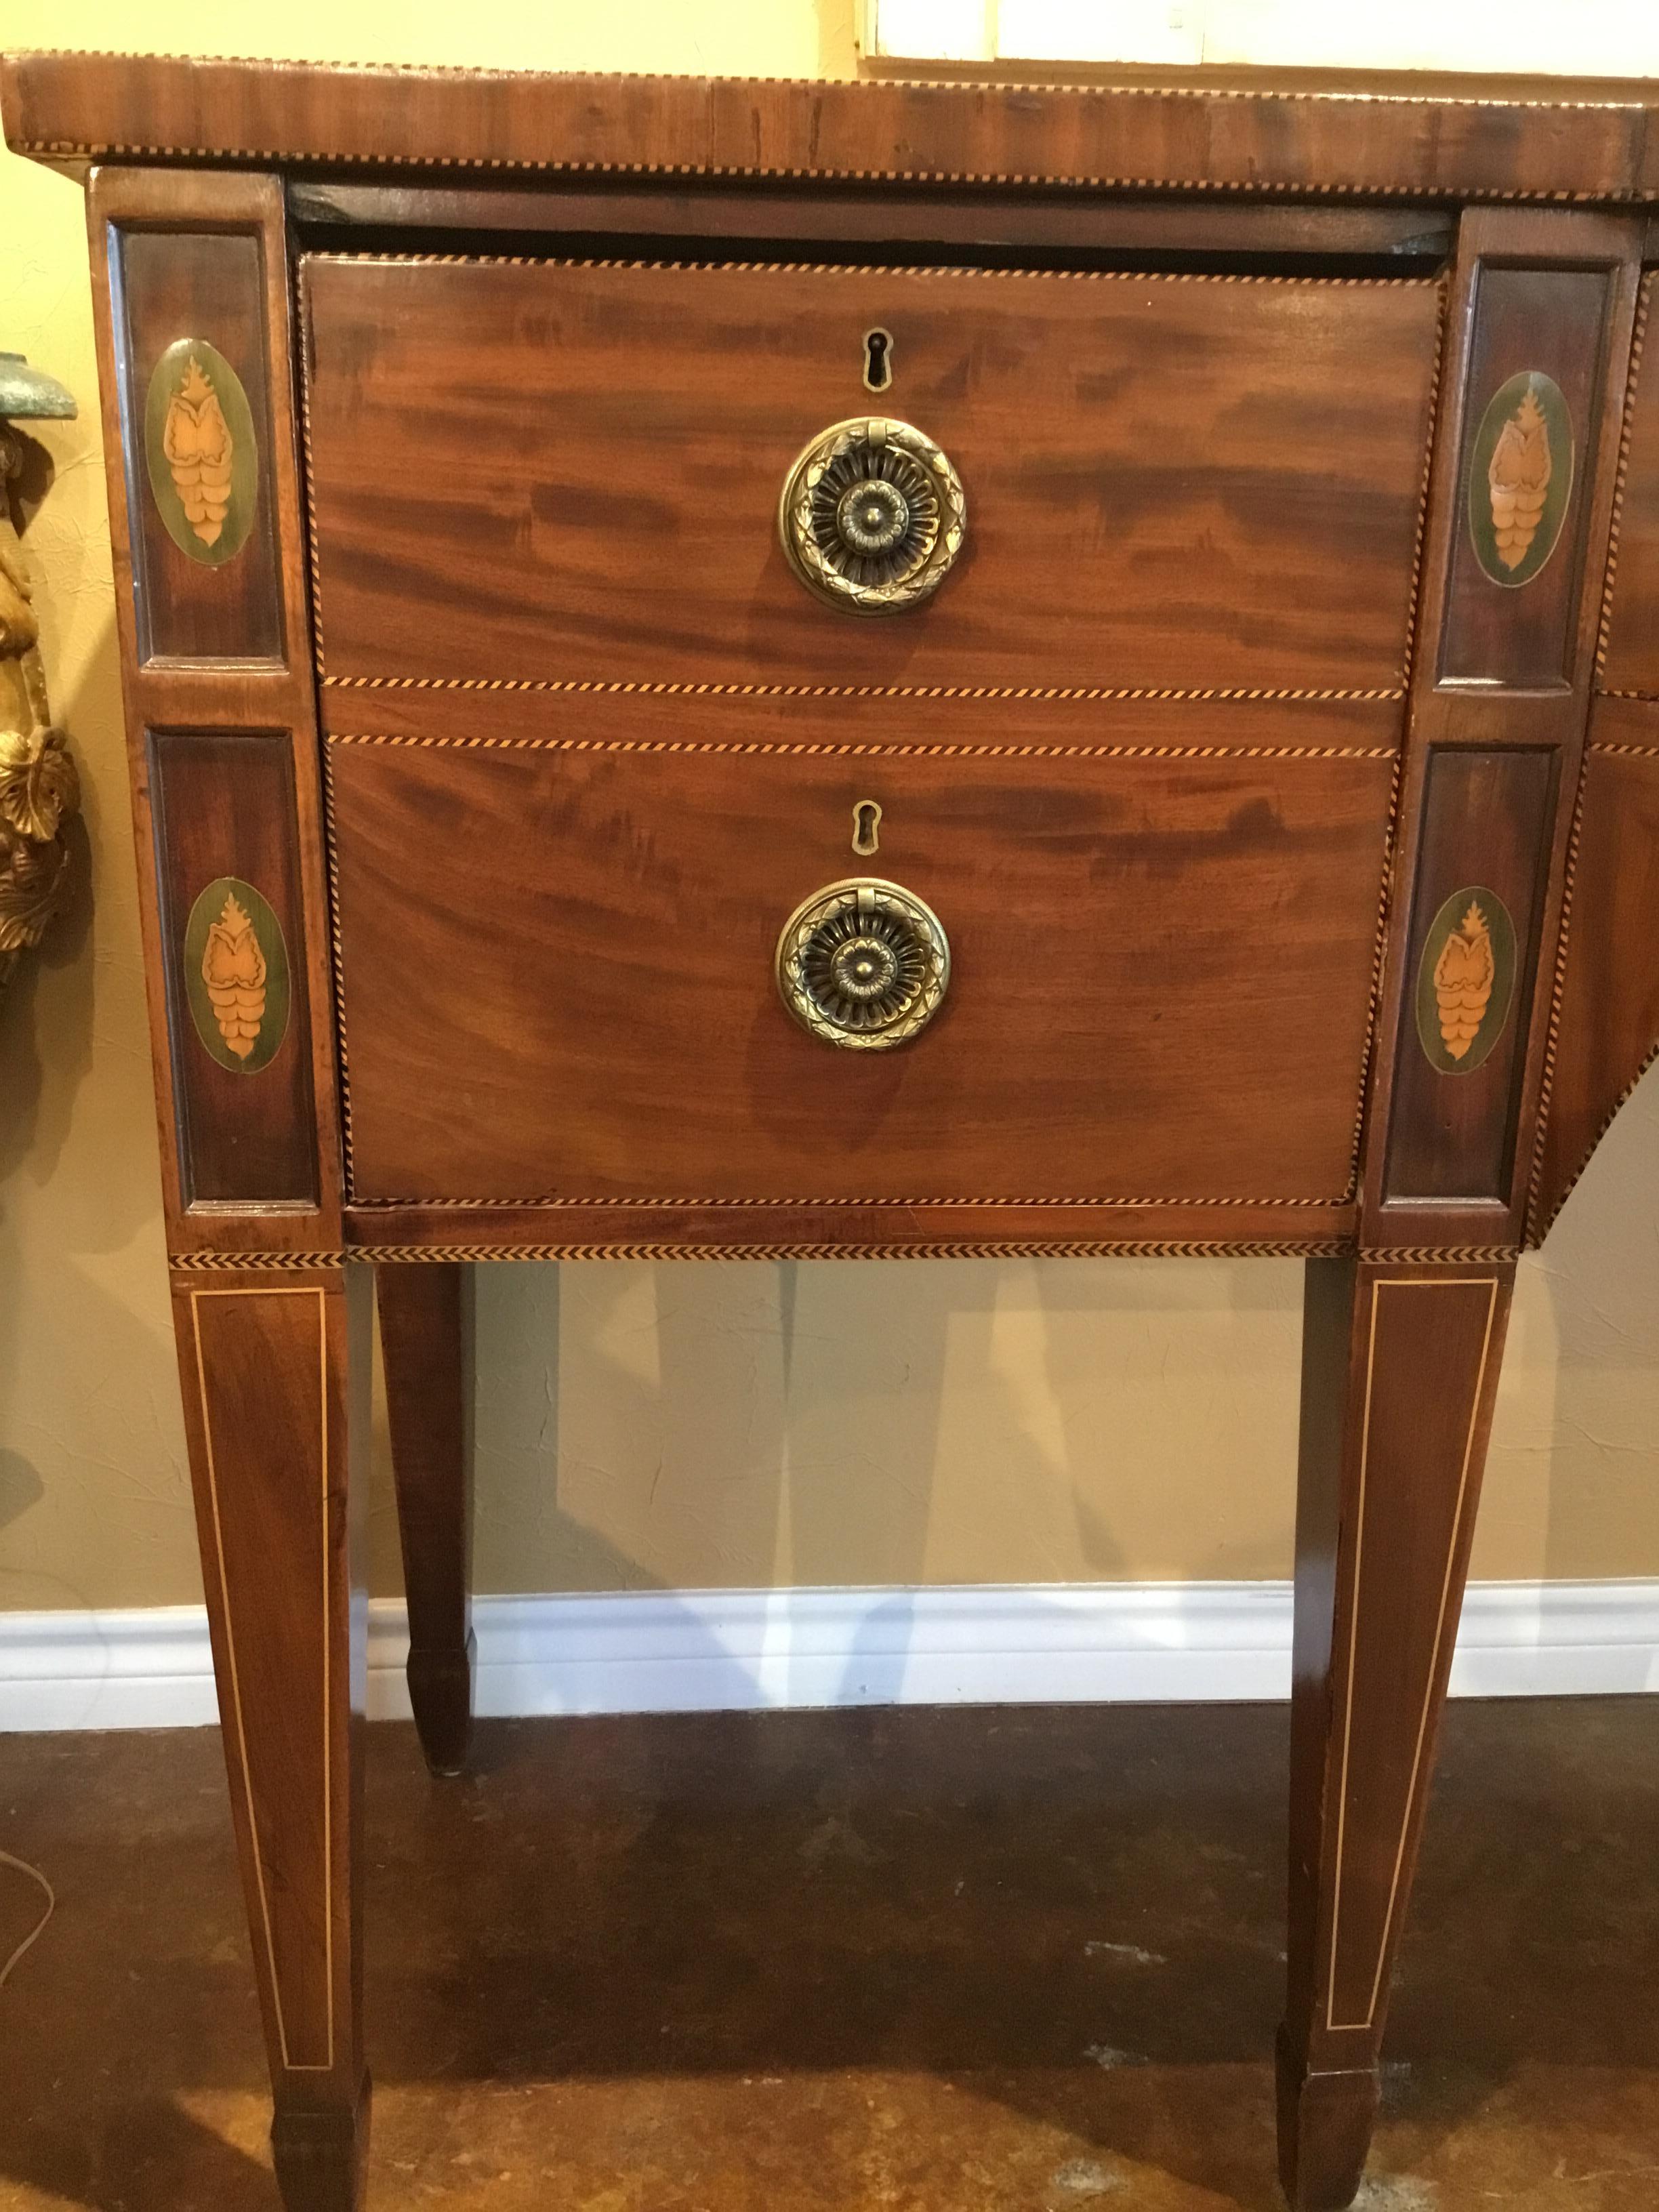 Mahogany and Satinwood Buffet/Sideboard circa 1840 with Marquetry Inlay Sheraton In Good Condition For Sale In Houston, TX